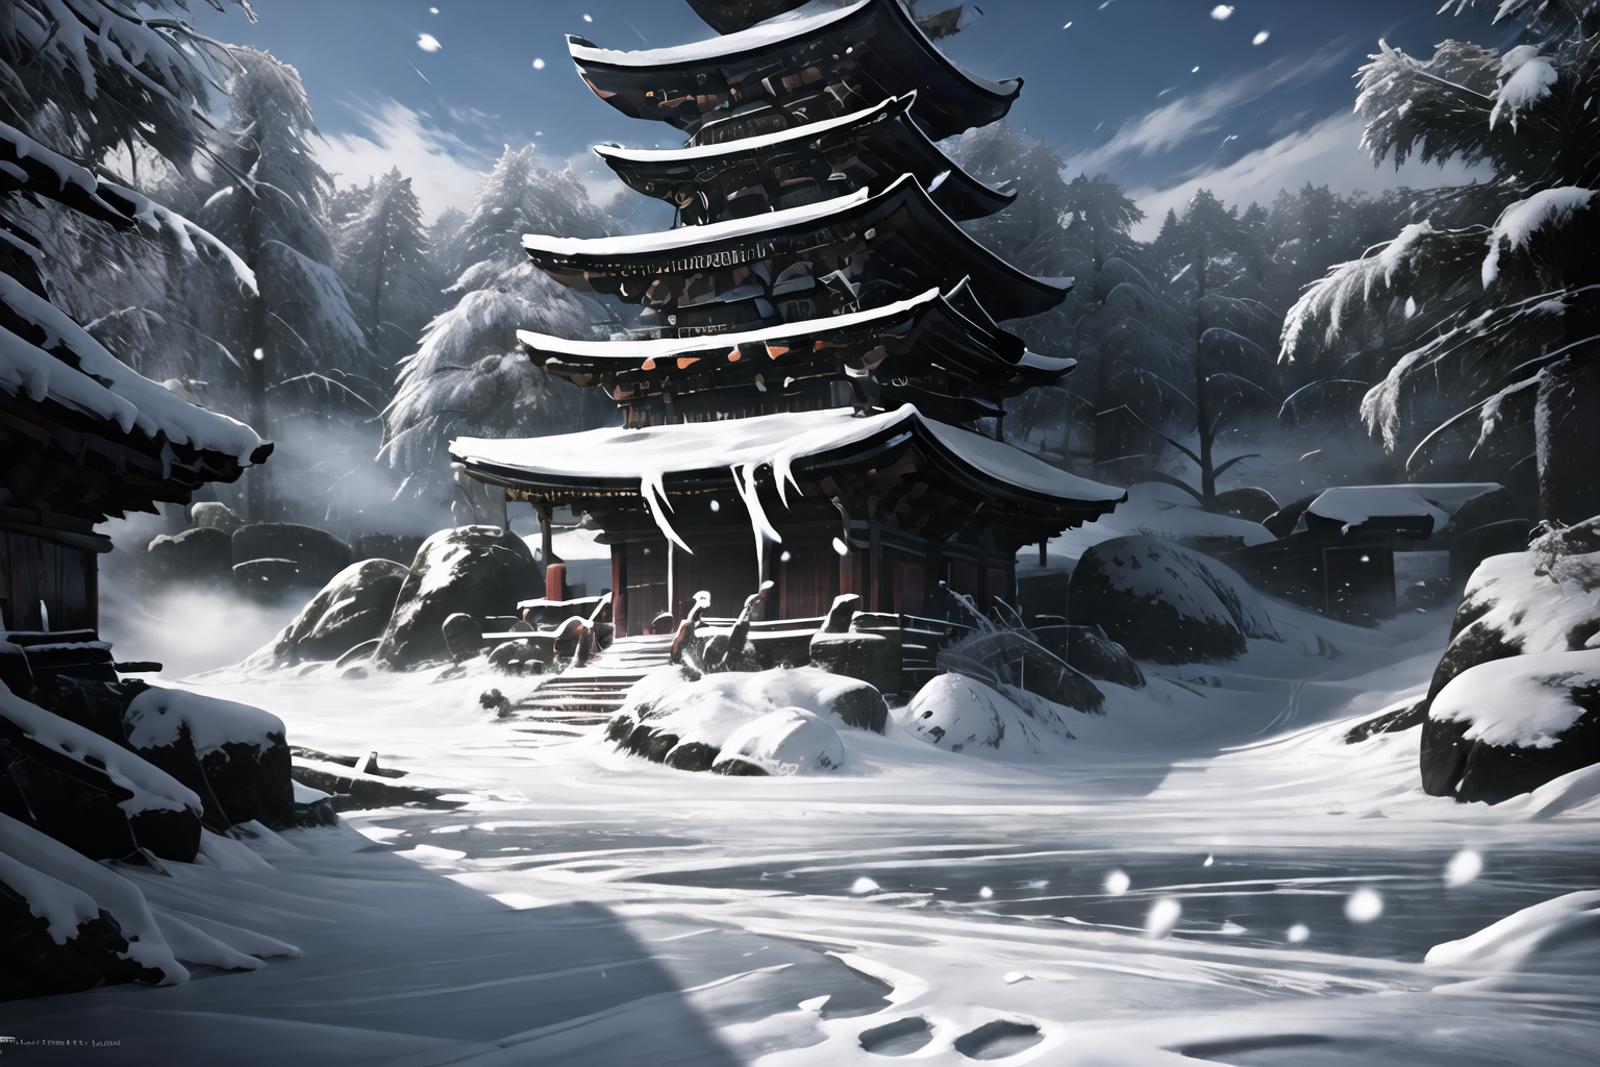 Ghost of Tsushima image by Aowrow